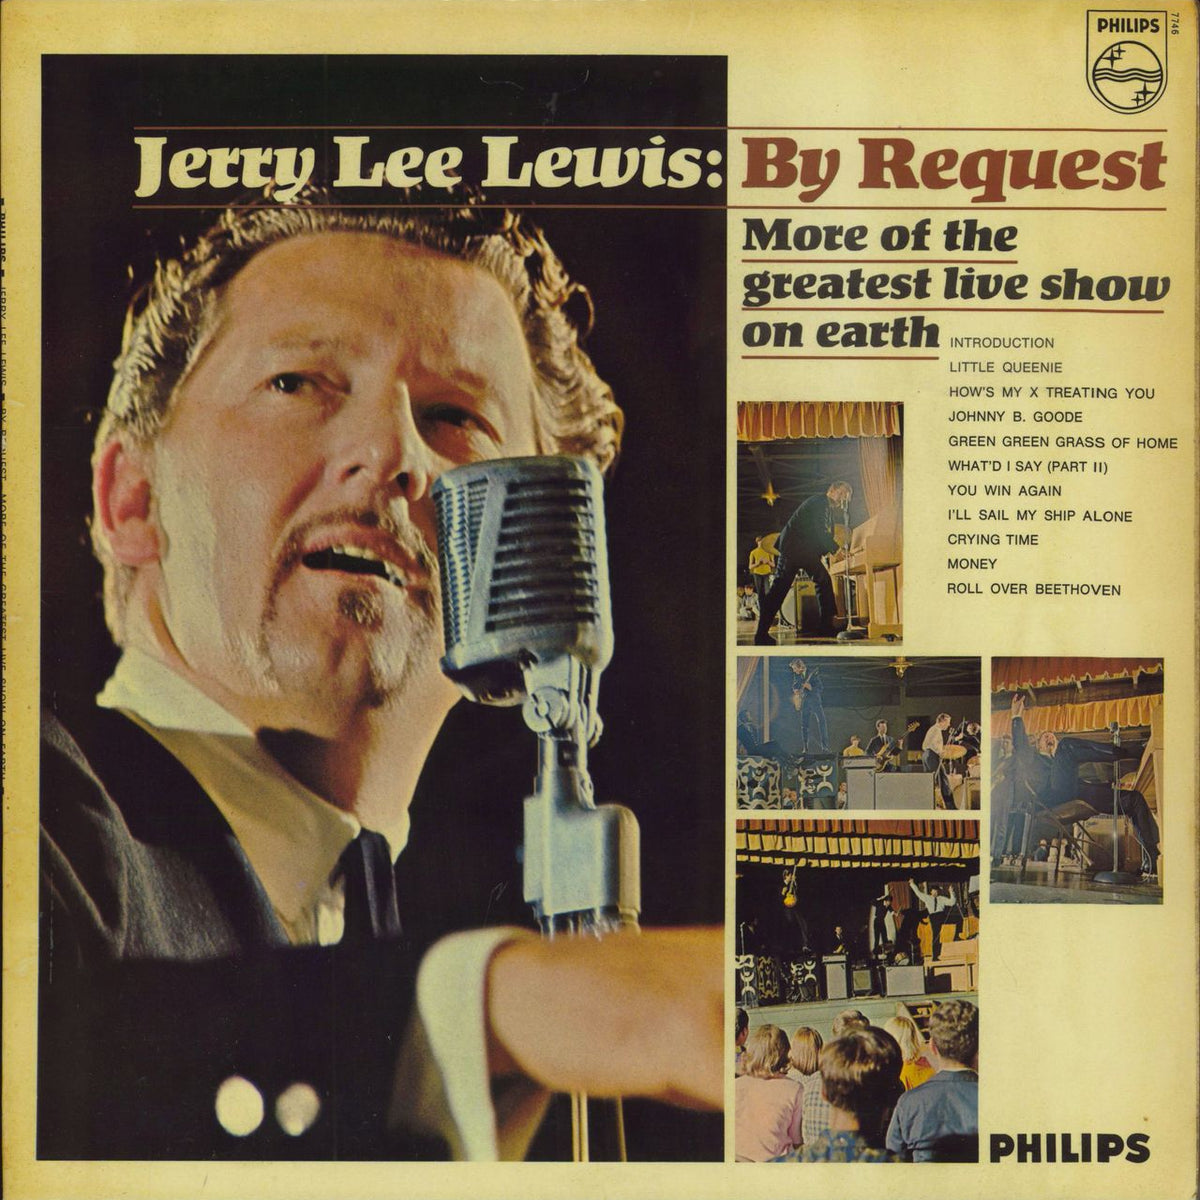 Request:　Lewis　By　The　Show　Greatest　UK　Live　More　Earth　—　Jerry　Of　Lee　On